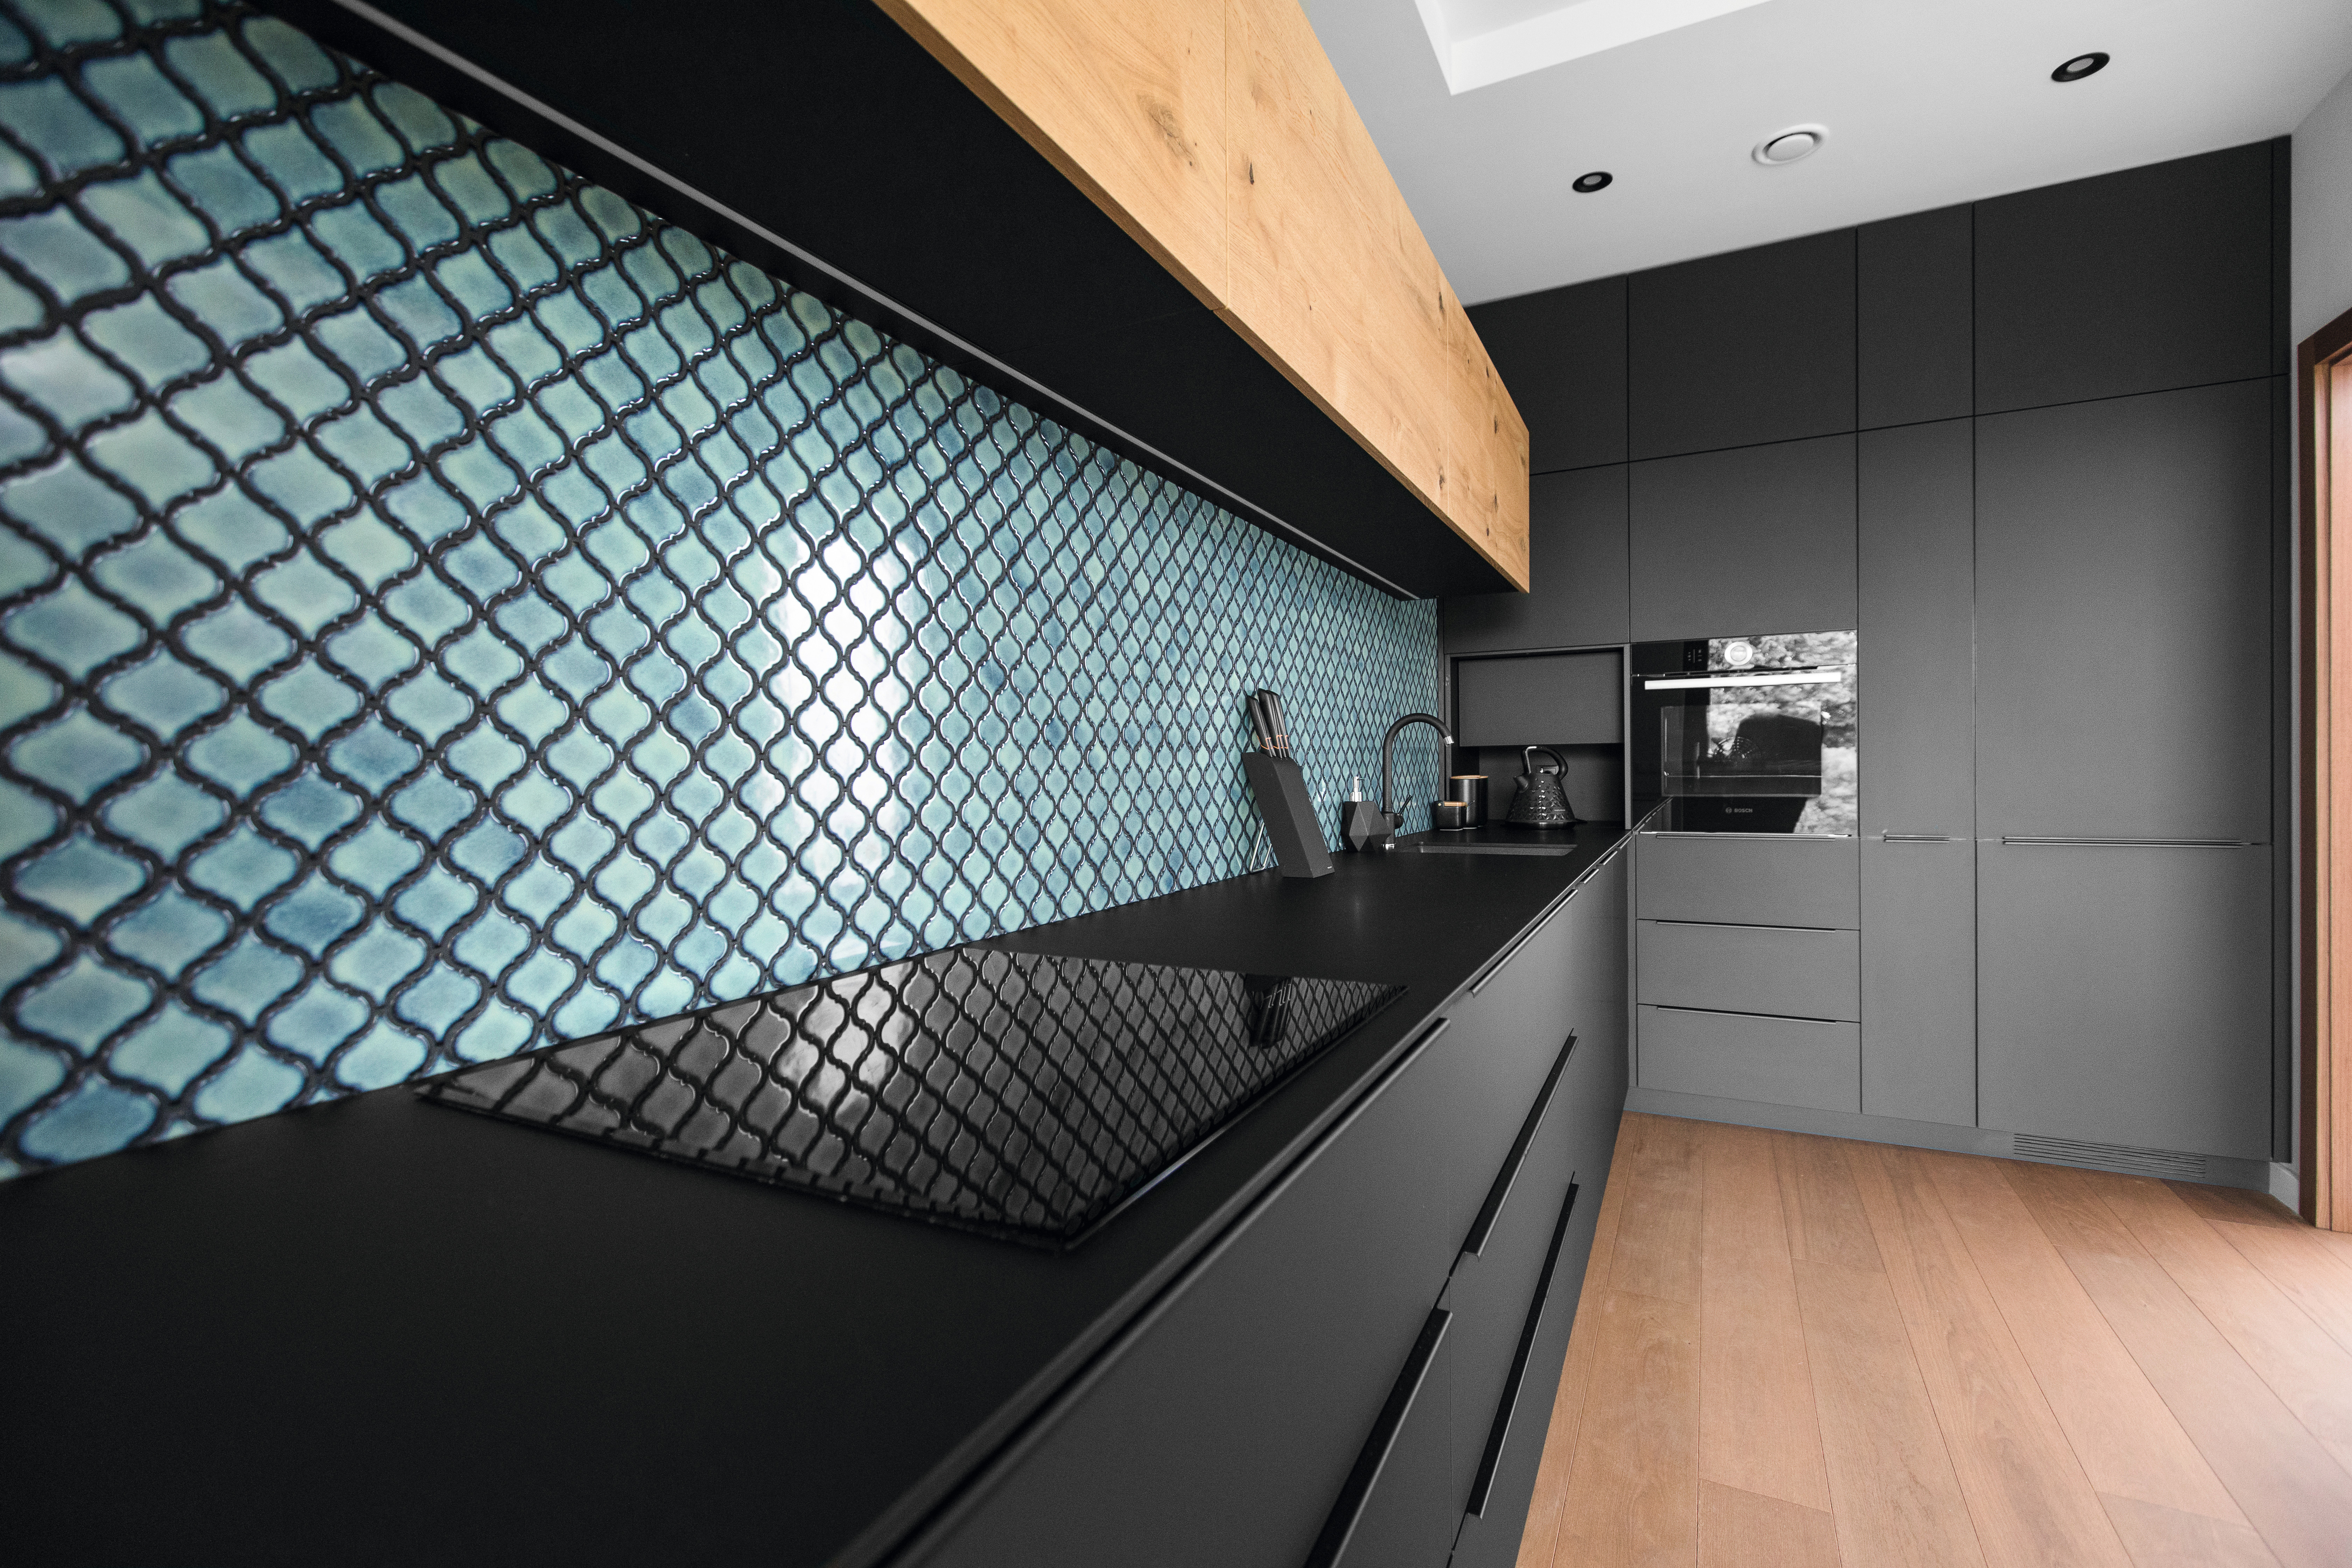 The black surface contrasts with the bright turquoise and mosaic design of the backsplash.